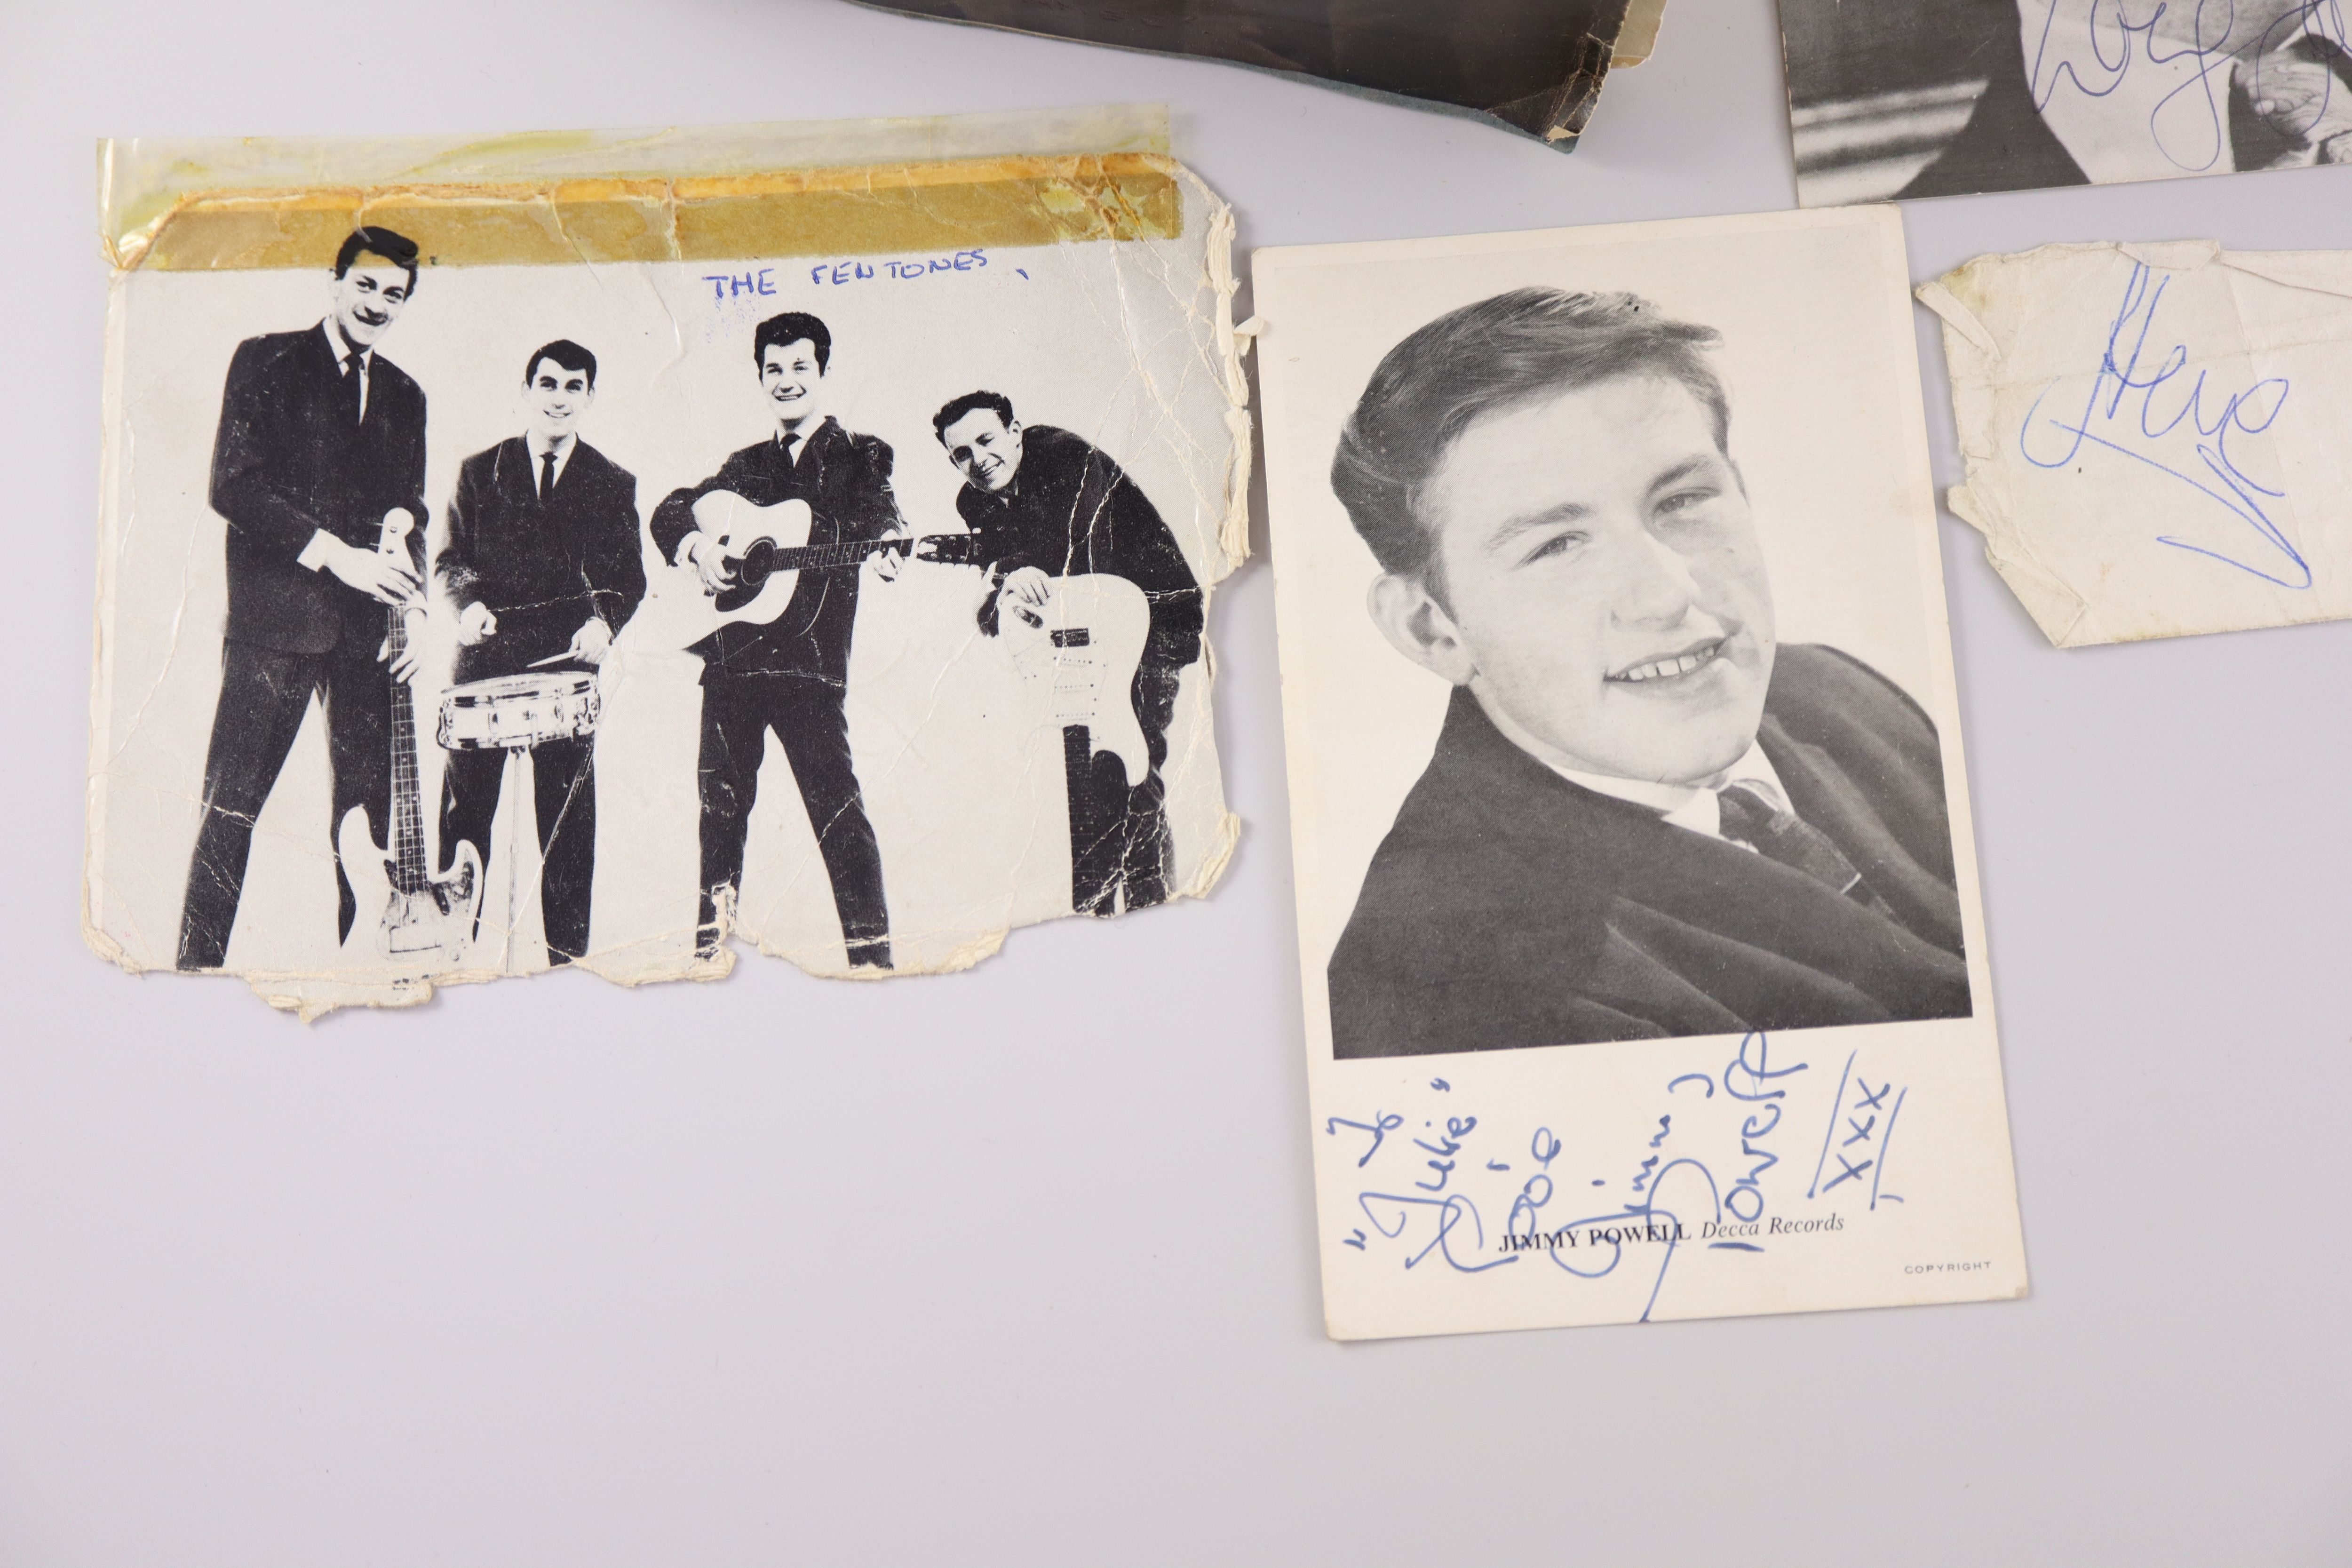 A 1960s album of rock musicians autographs including two sets of The Rolling Stones (includes Brian Jones), Johnny Kidd, c.1963-65